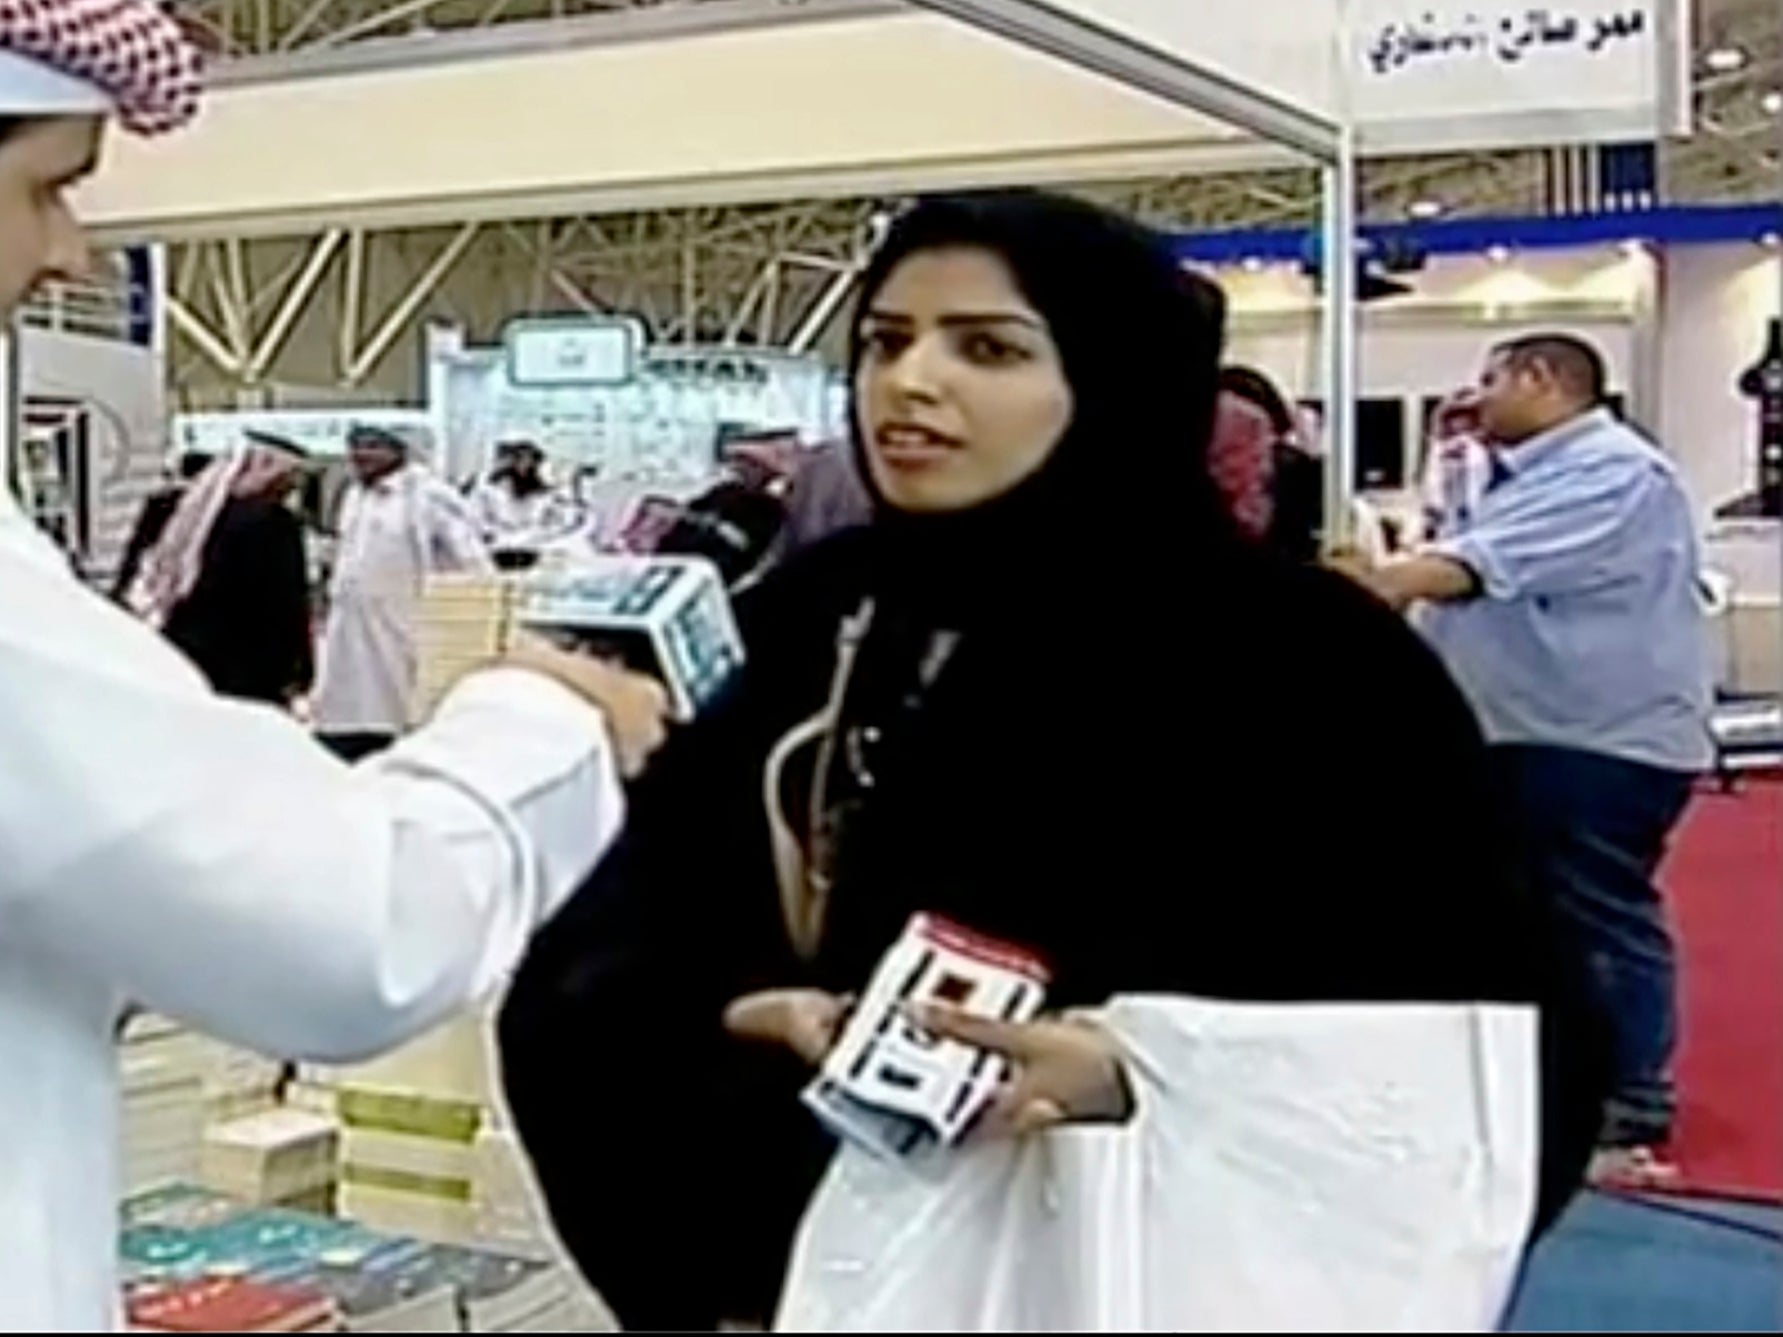 Salma al-Shehab, pictured here speaking to a journalist at Riyadh International Book Fair, has been jailed for 34 years in Saudi Arabia